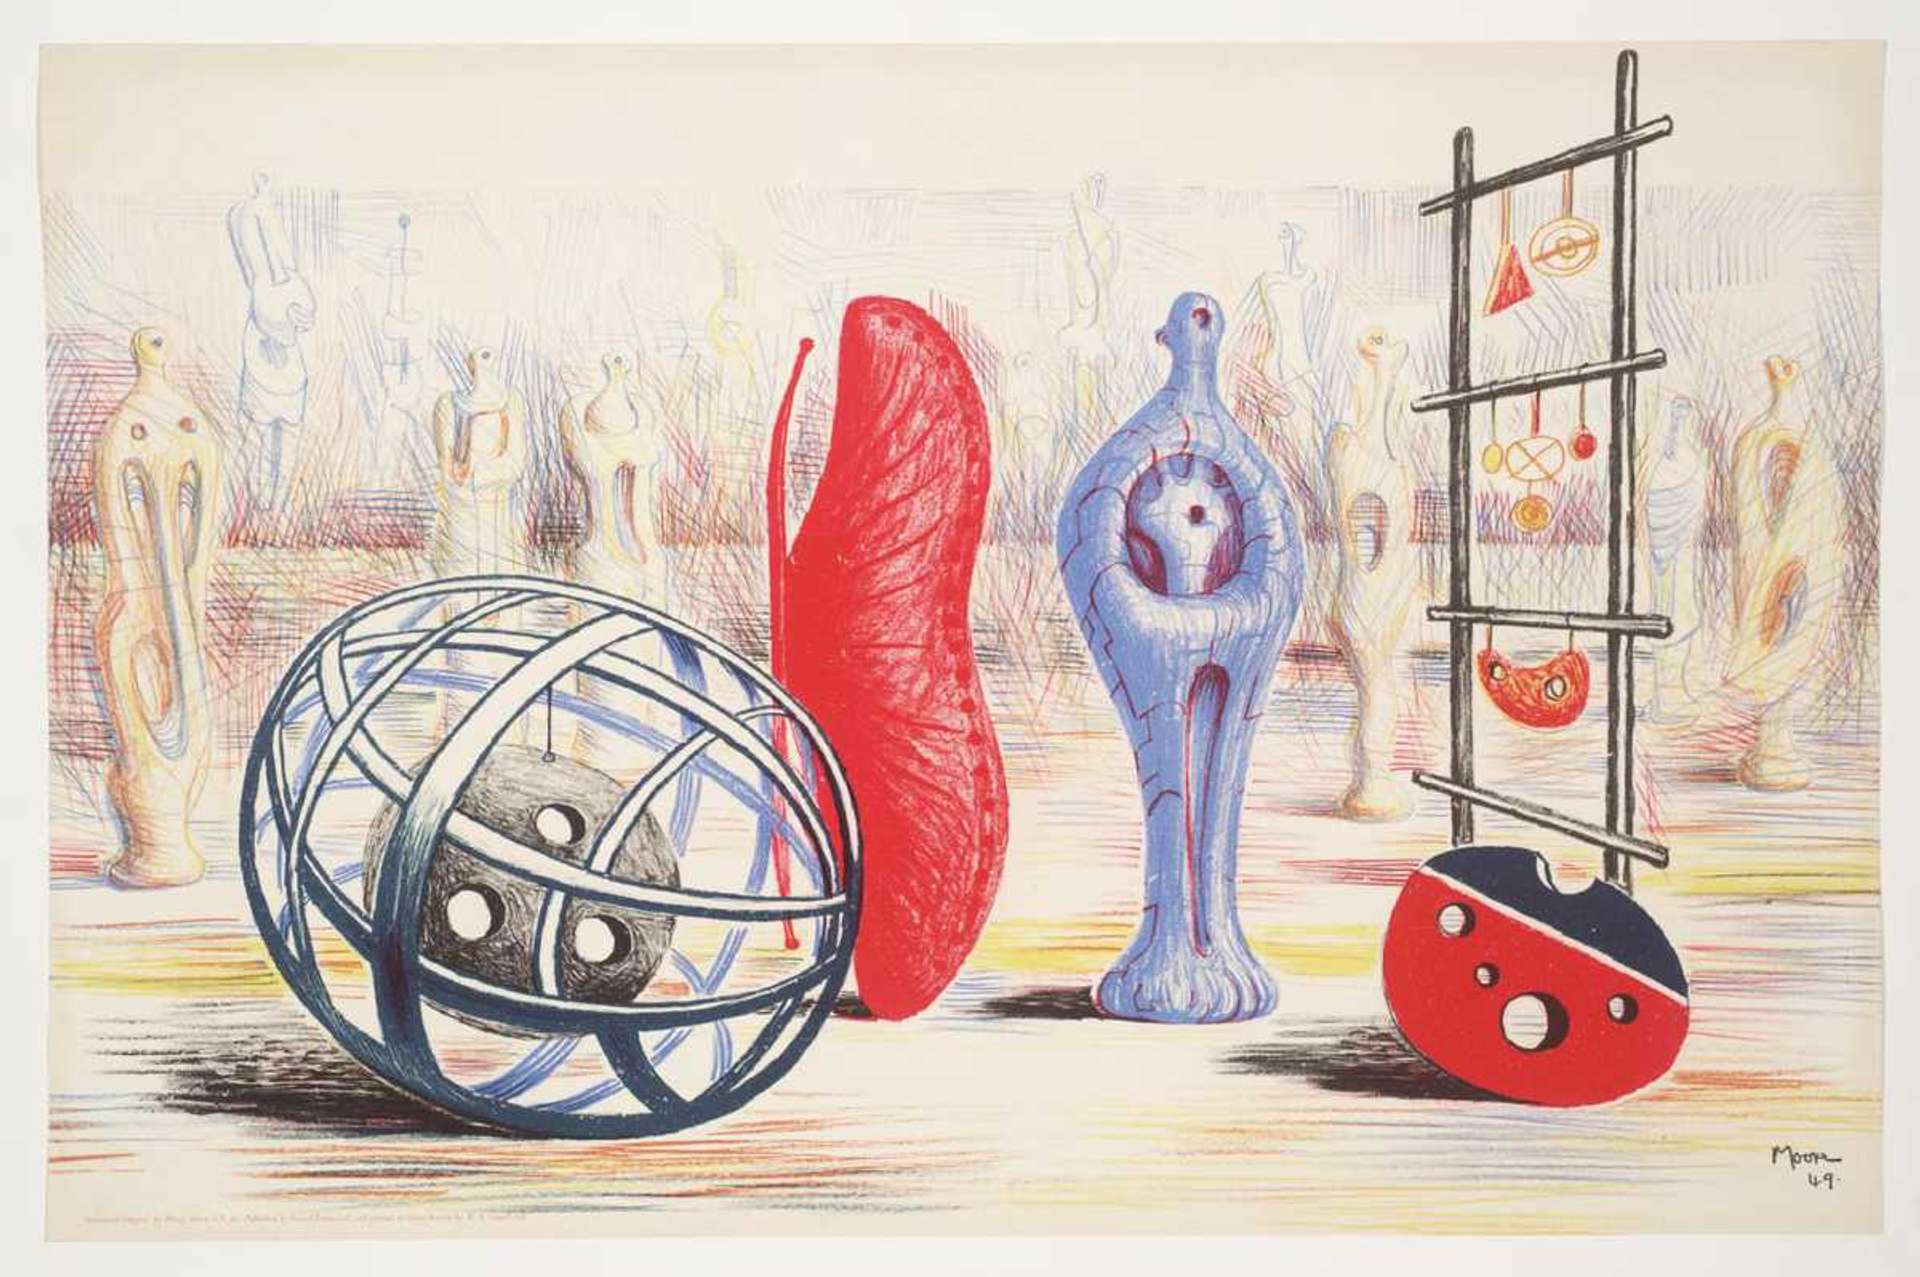 Abstract screenprint with three-dimensional spheres, axis lines, a smaller sphere with holes, and a larger sphere on the left supporting a ladder assembly. Various abstract sculptural objects in different colors create a surreal atmosphere.